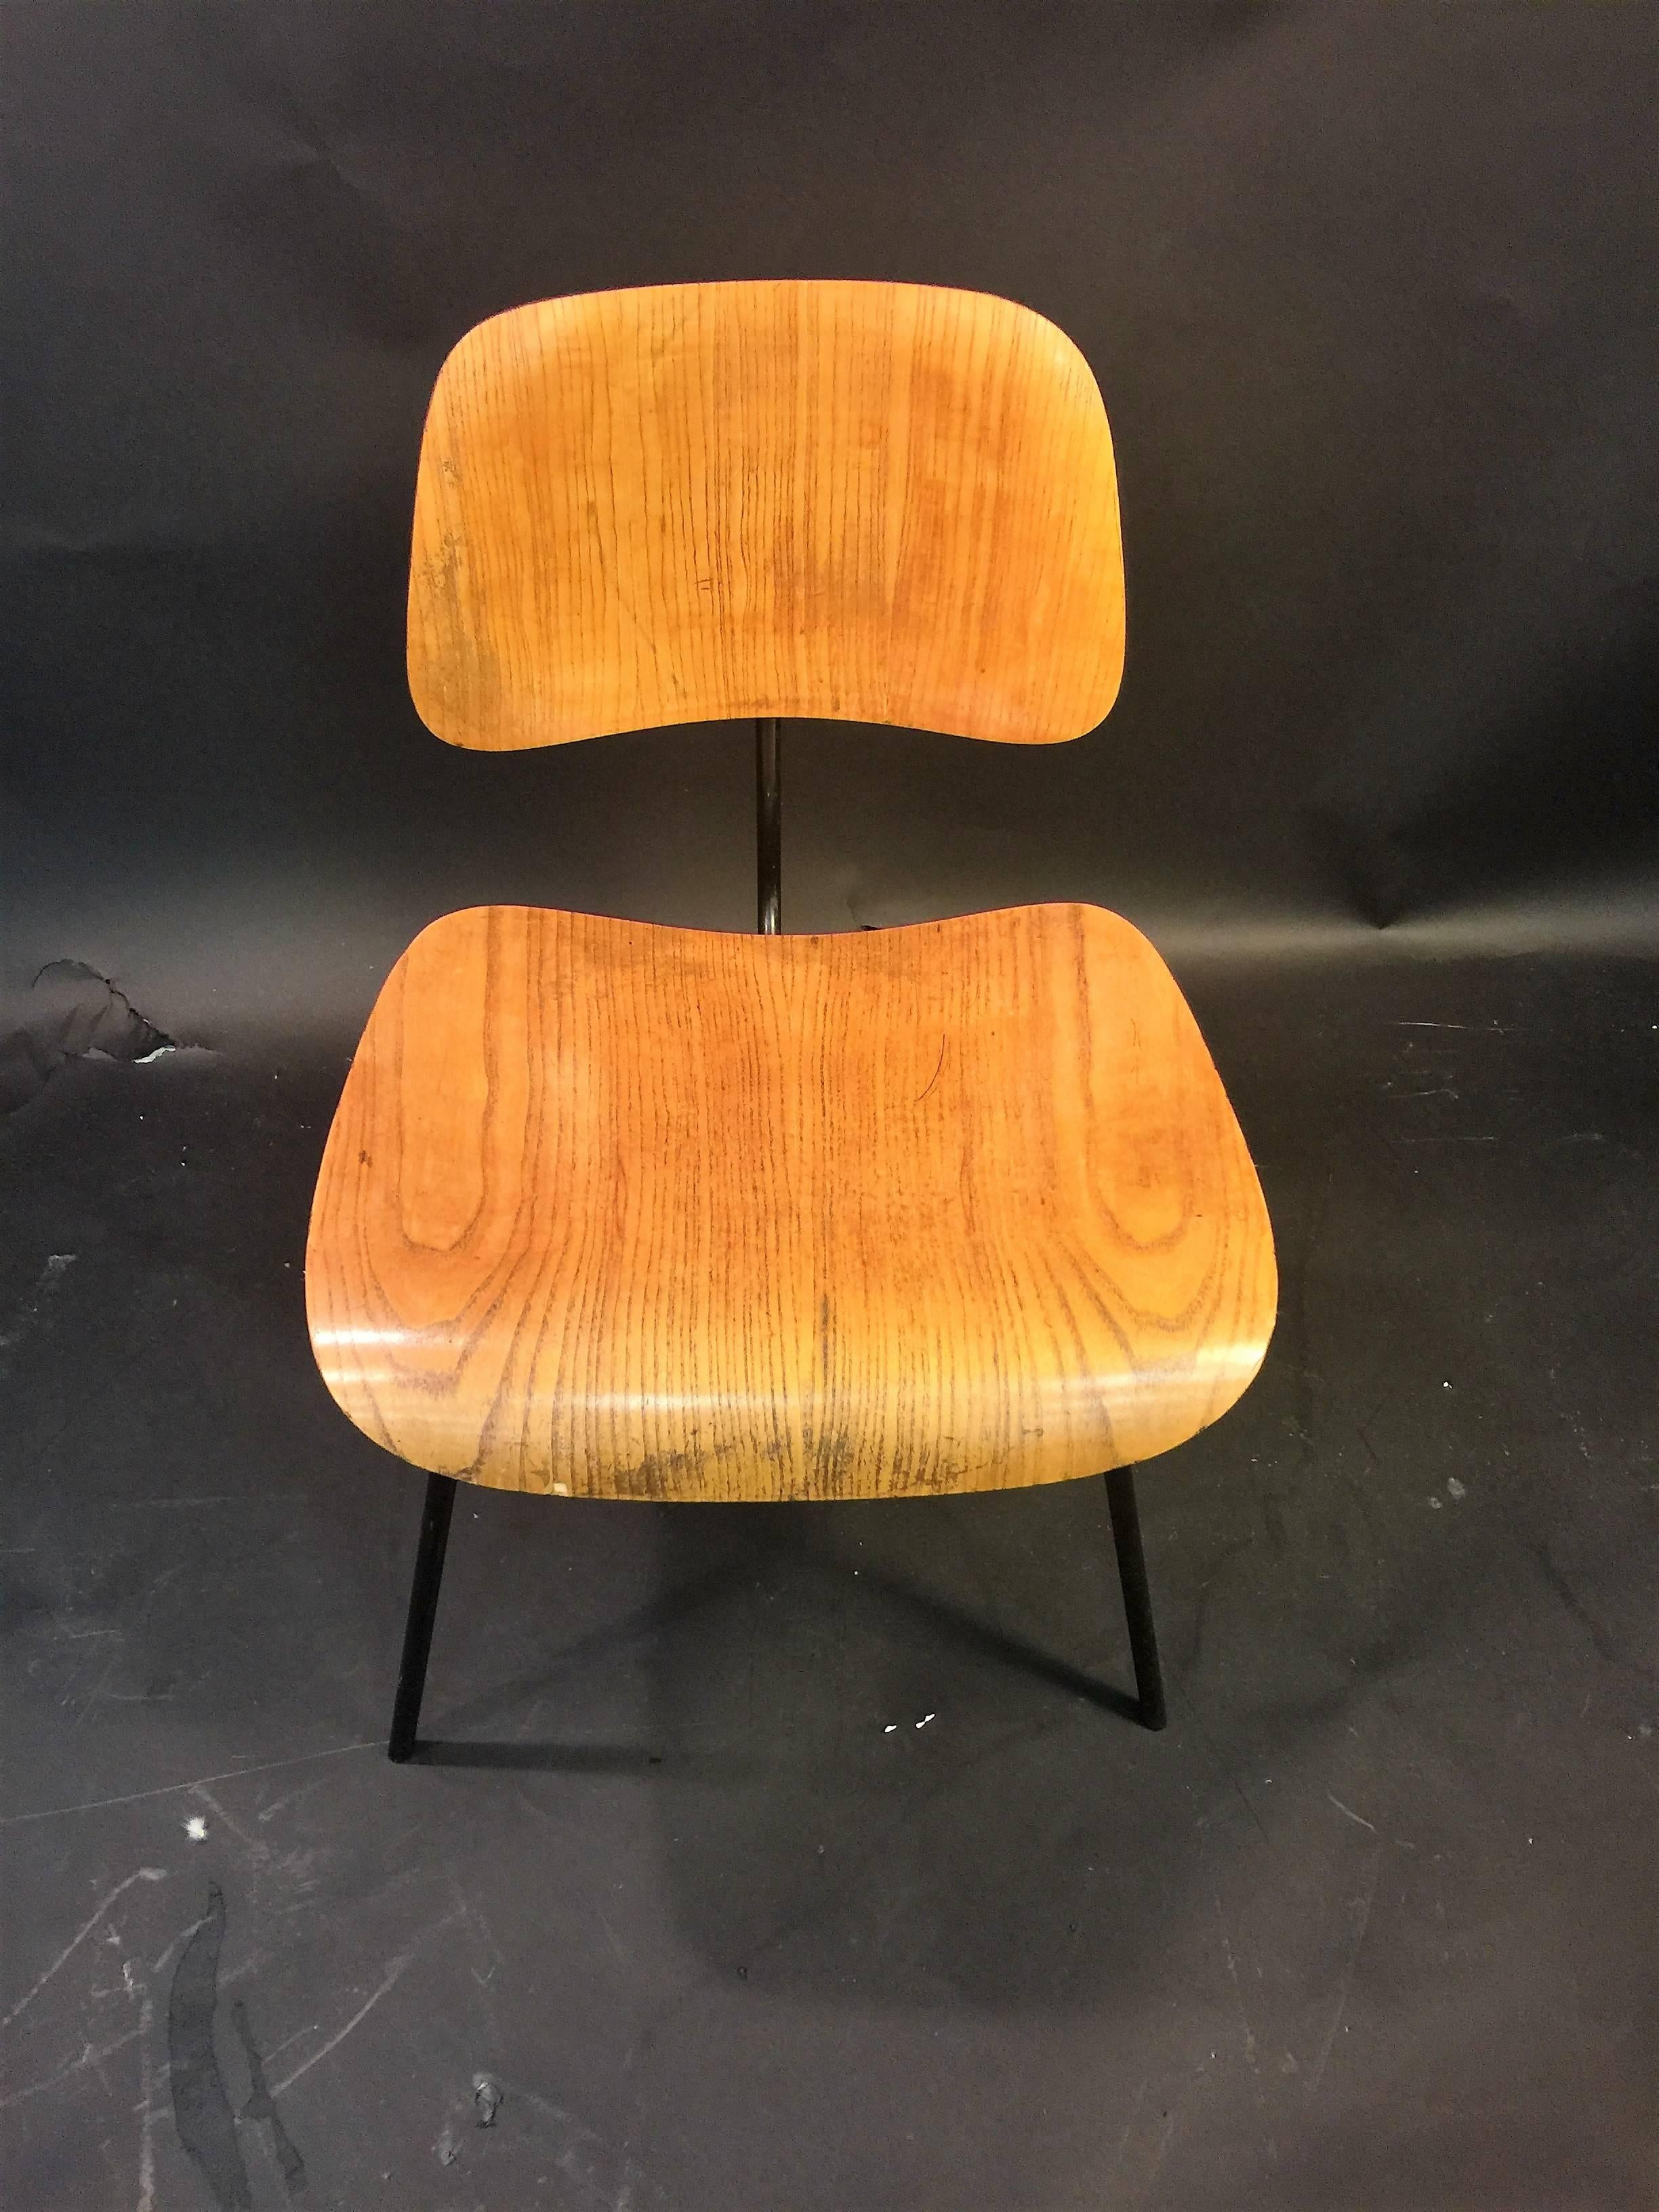 Pair of Early Charles Eames LCM Chairs In Good Condition For Sale In Mount Penn, PA